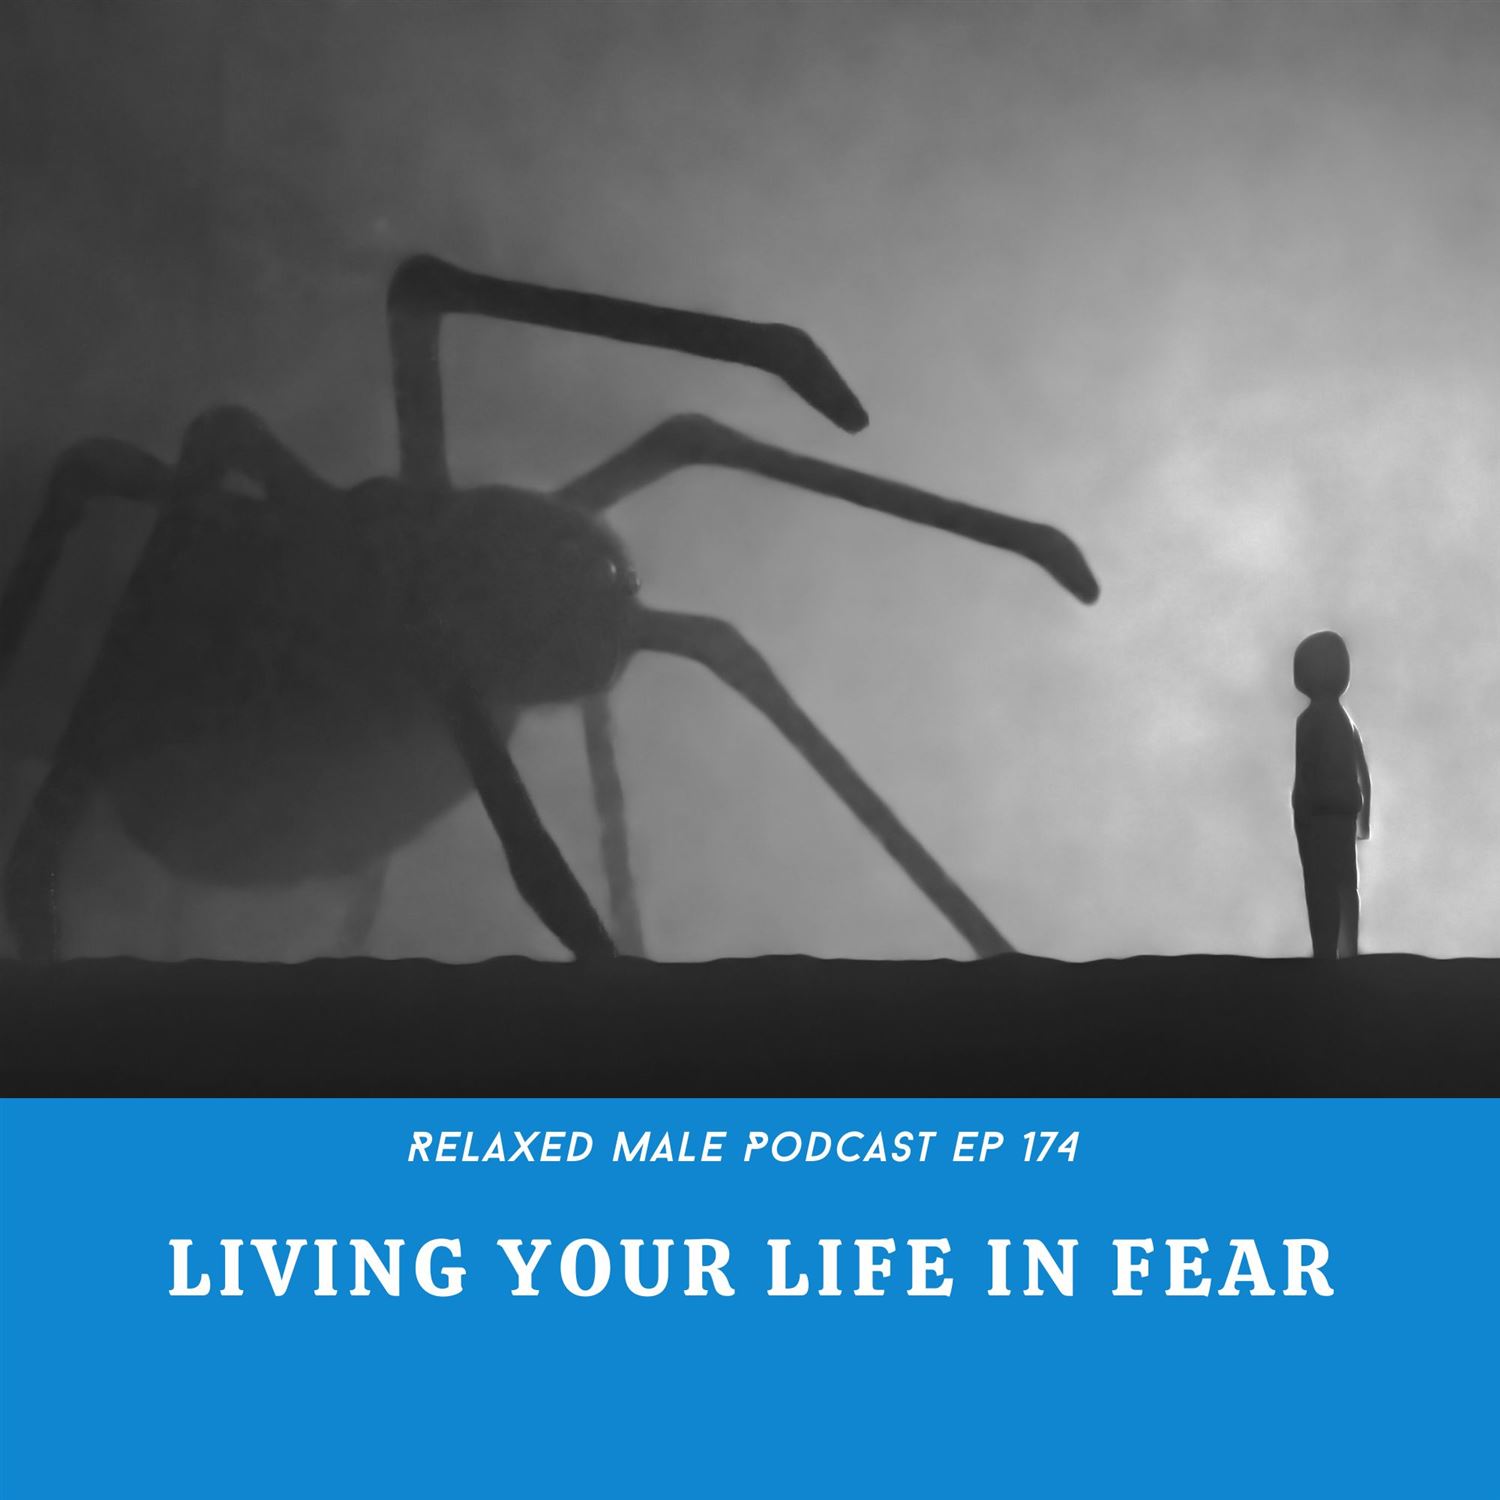 Living Your Life in Fear